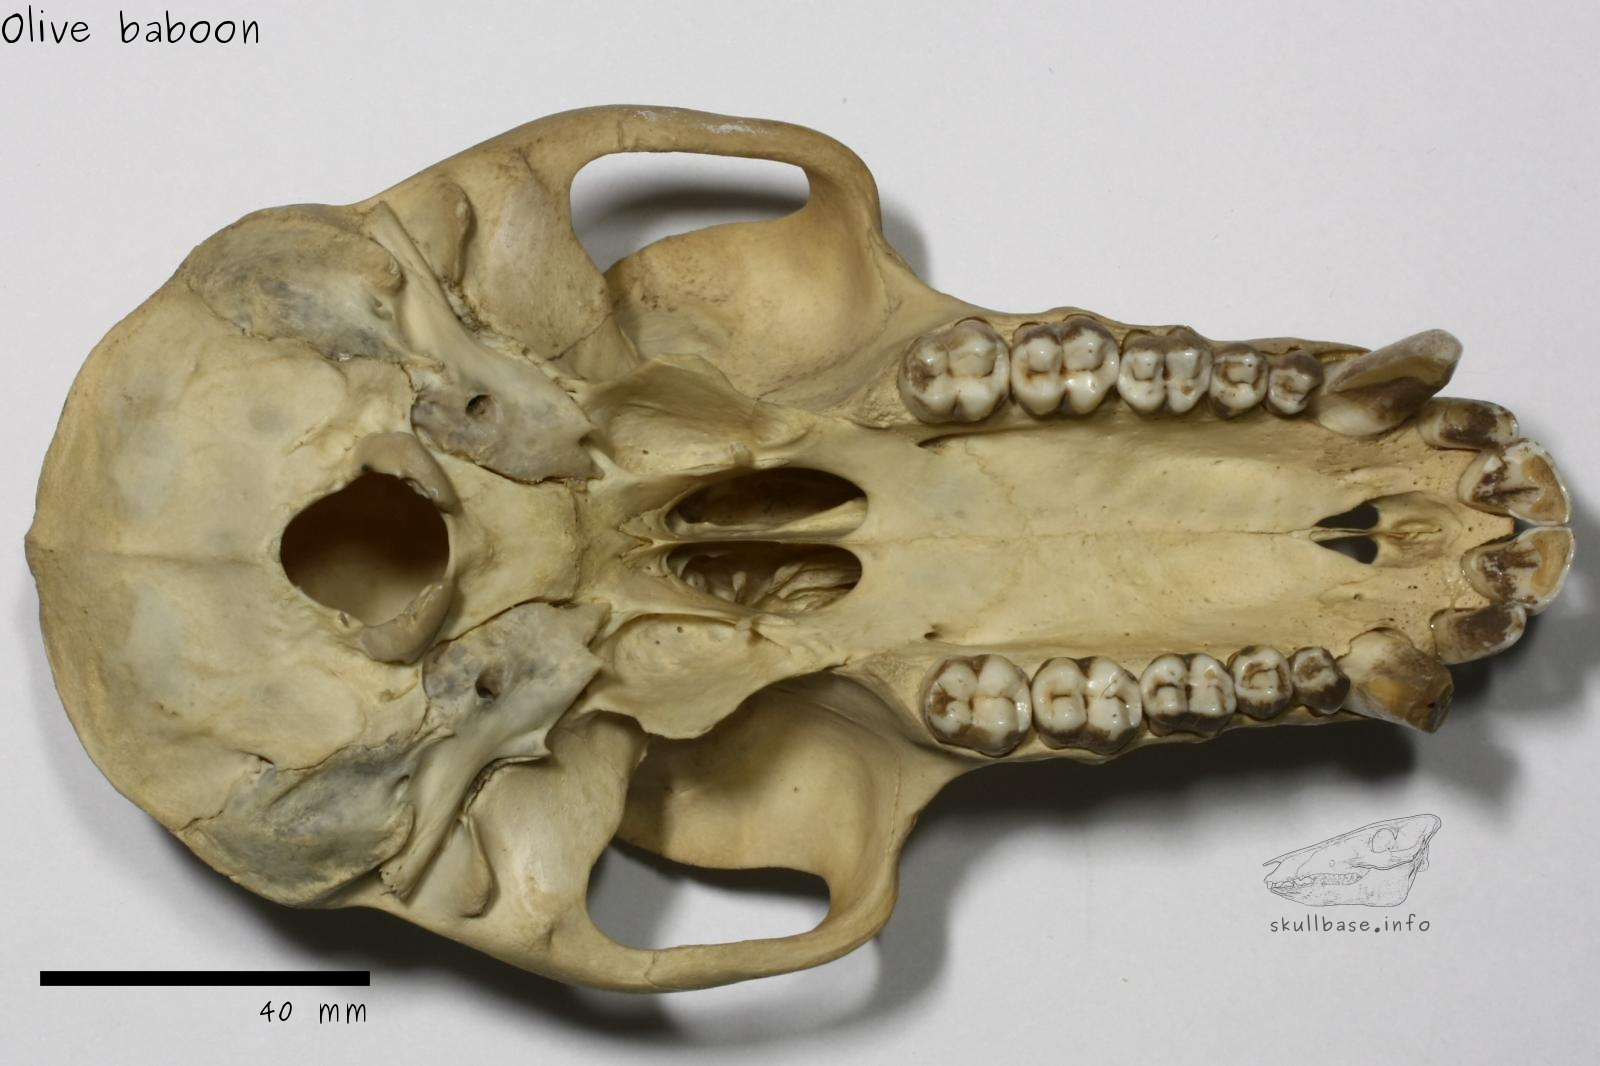 Olive baboon (Papio anubis) skull ventral view